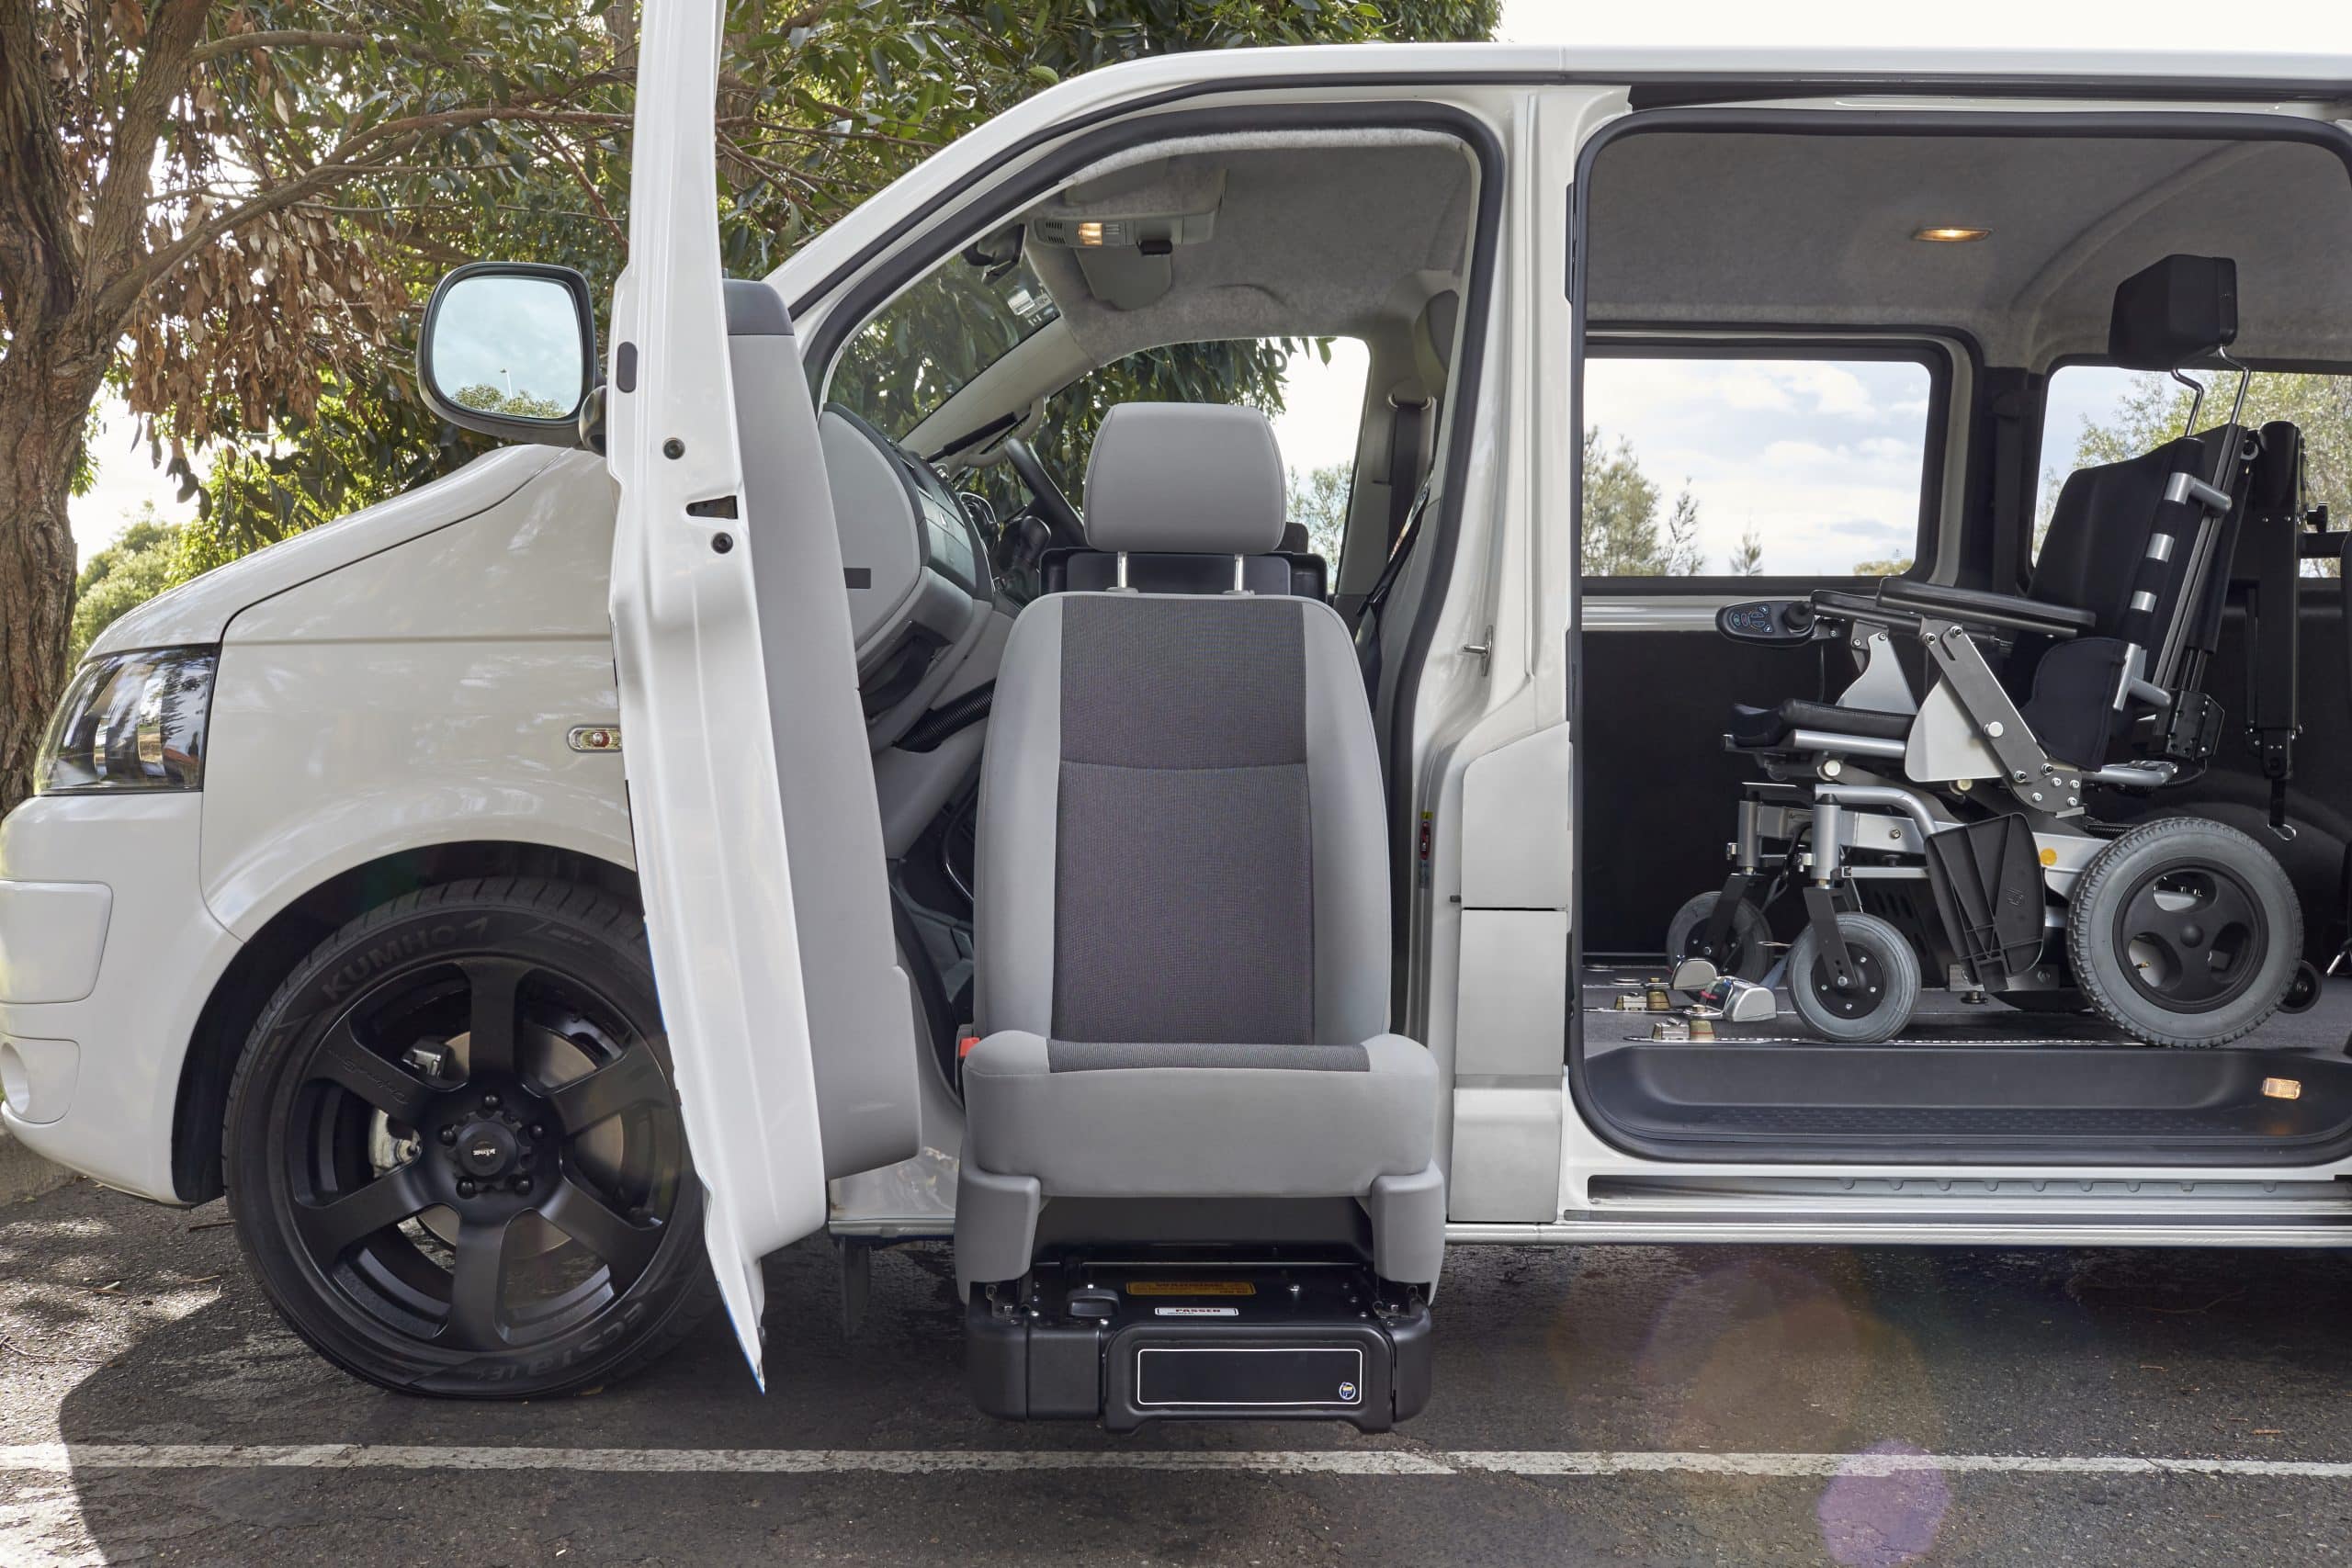 wheelchair swivel seat makes up part of the value of a disability converted car